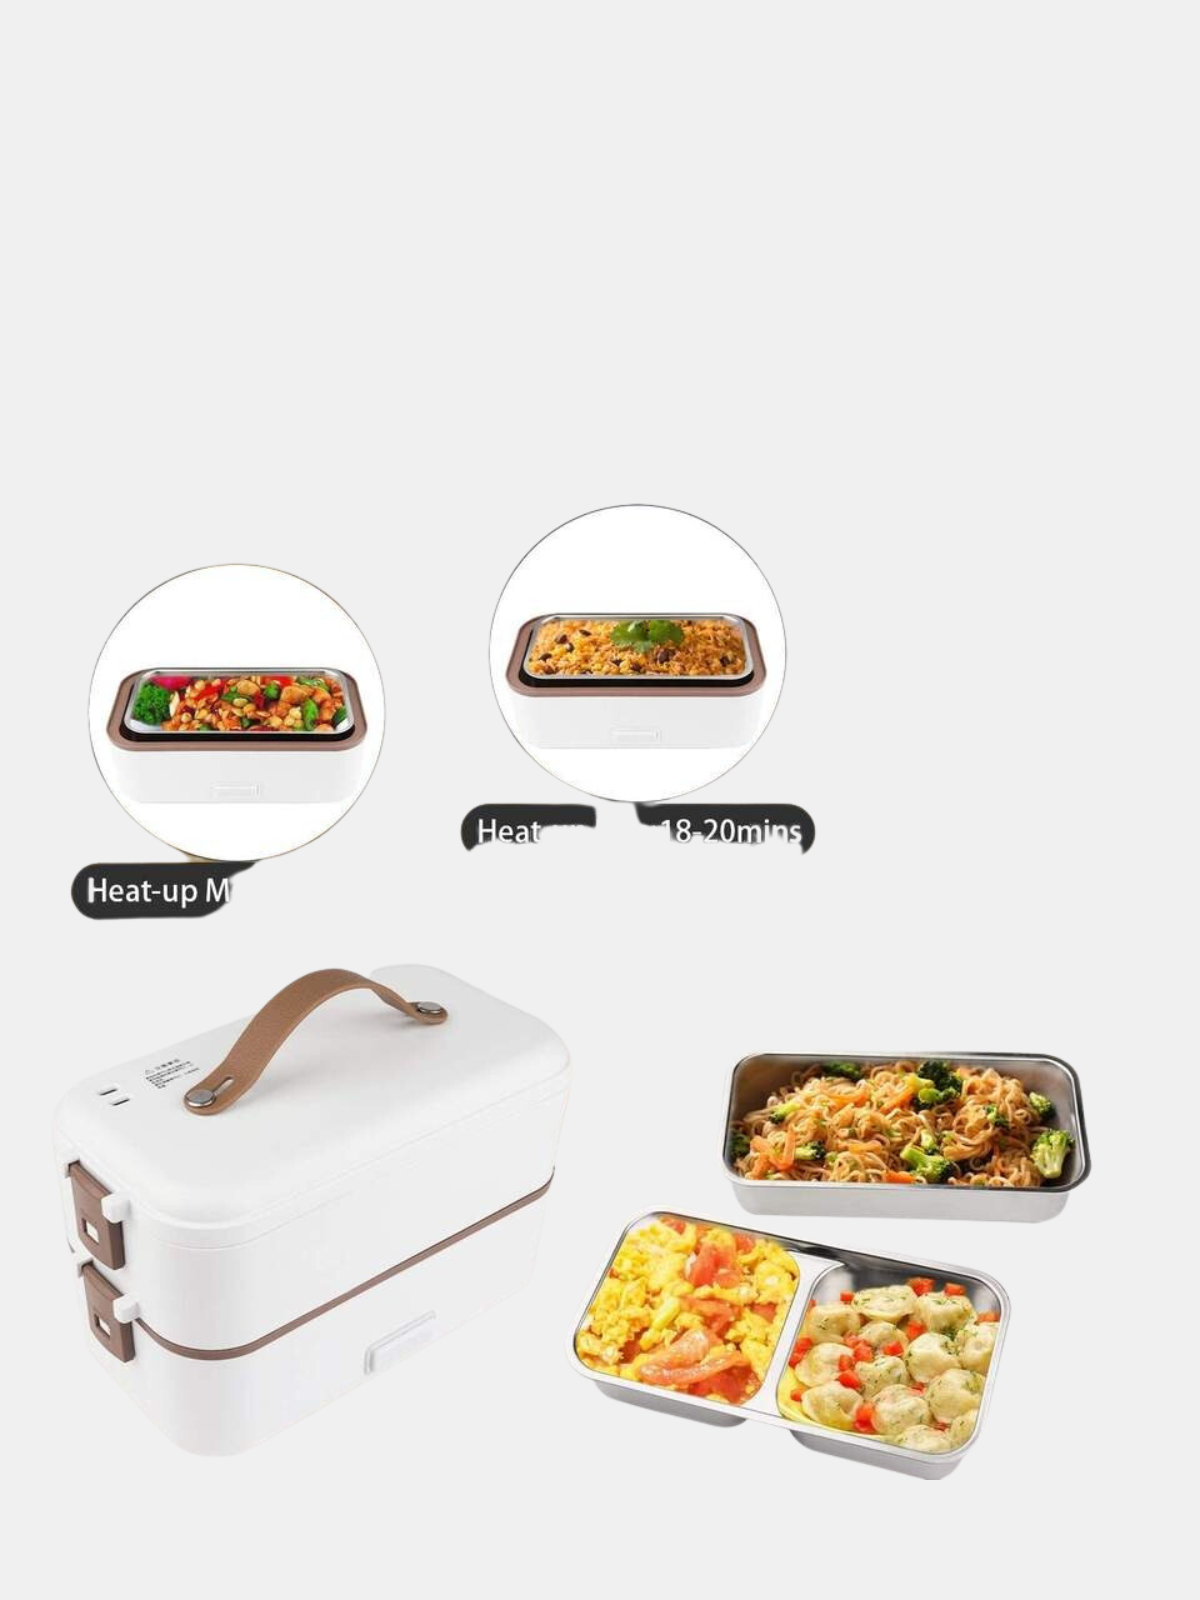 Electric Lunch Box, Self Cooking Electric Lunch Box, Heating Lunch